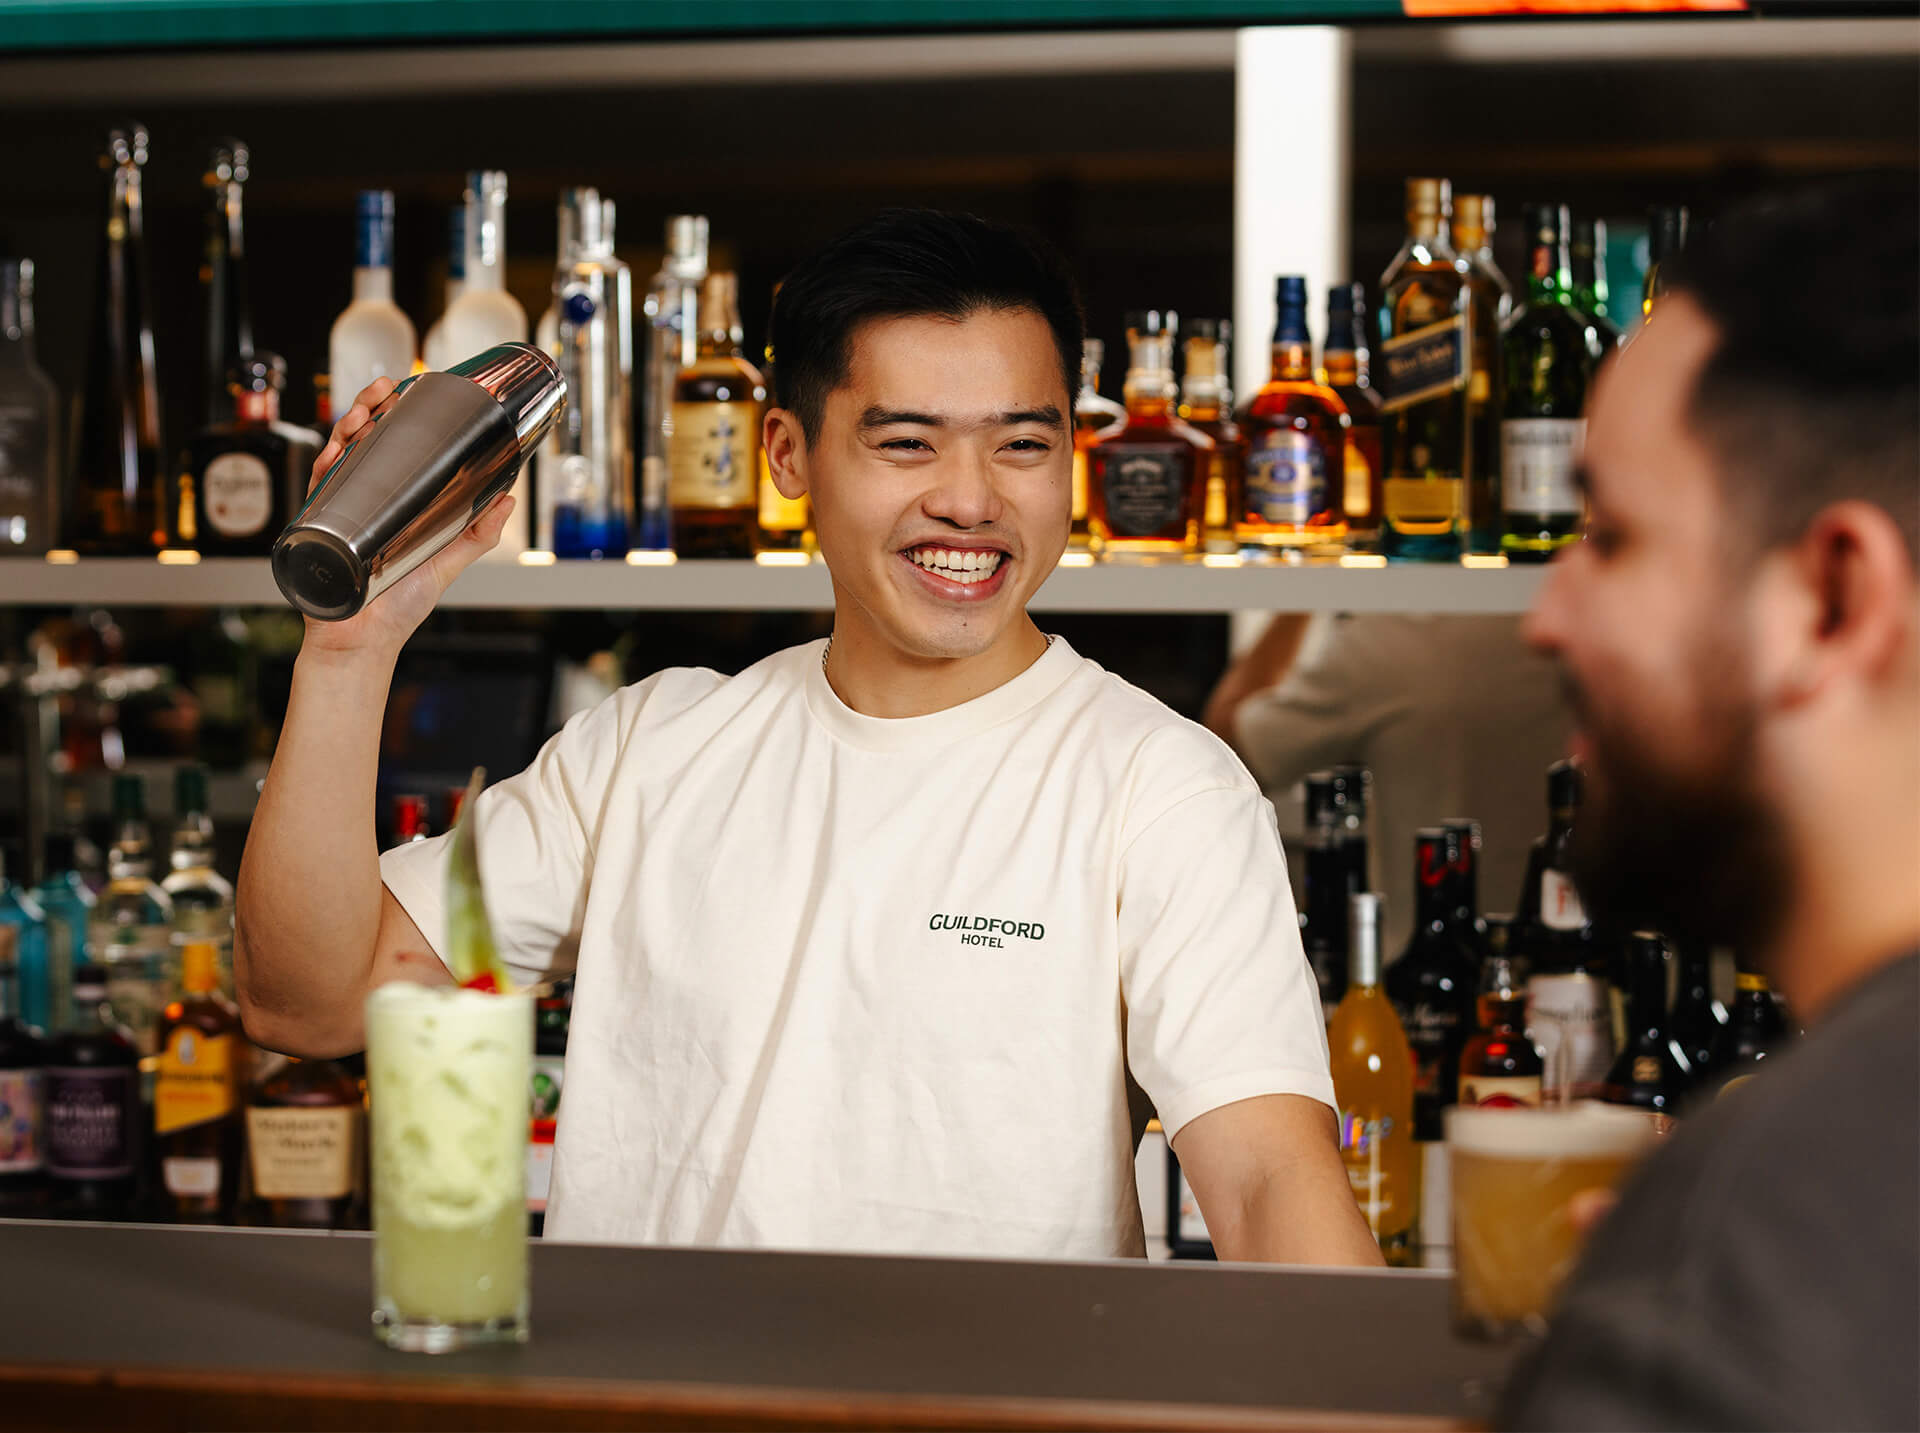 A bartender at Guildford Hotel, smiling while confidently holding a cocktail shaker. Cheers to a great time!